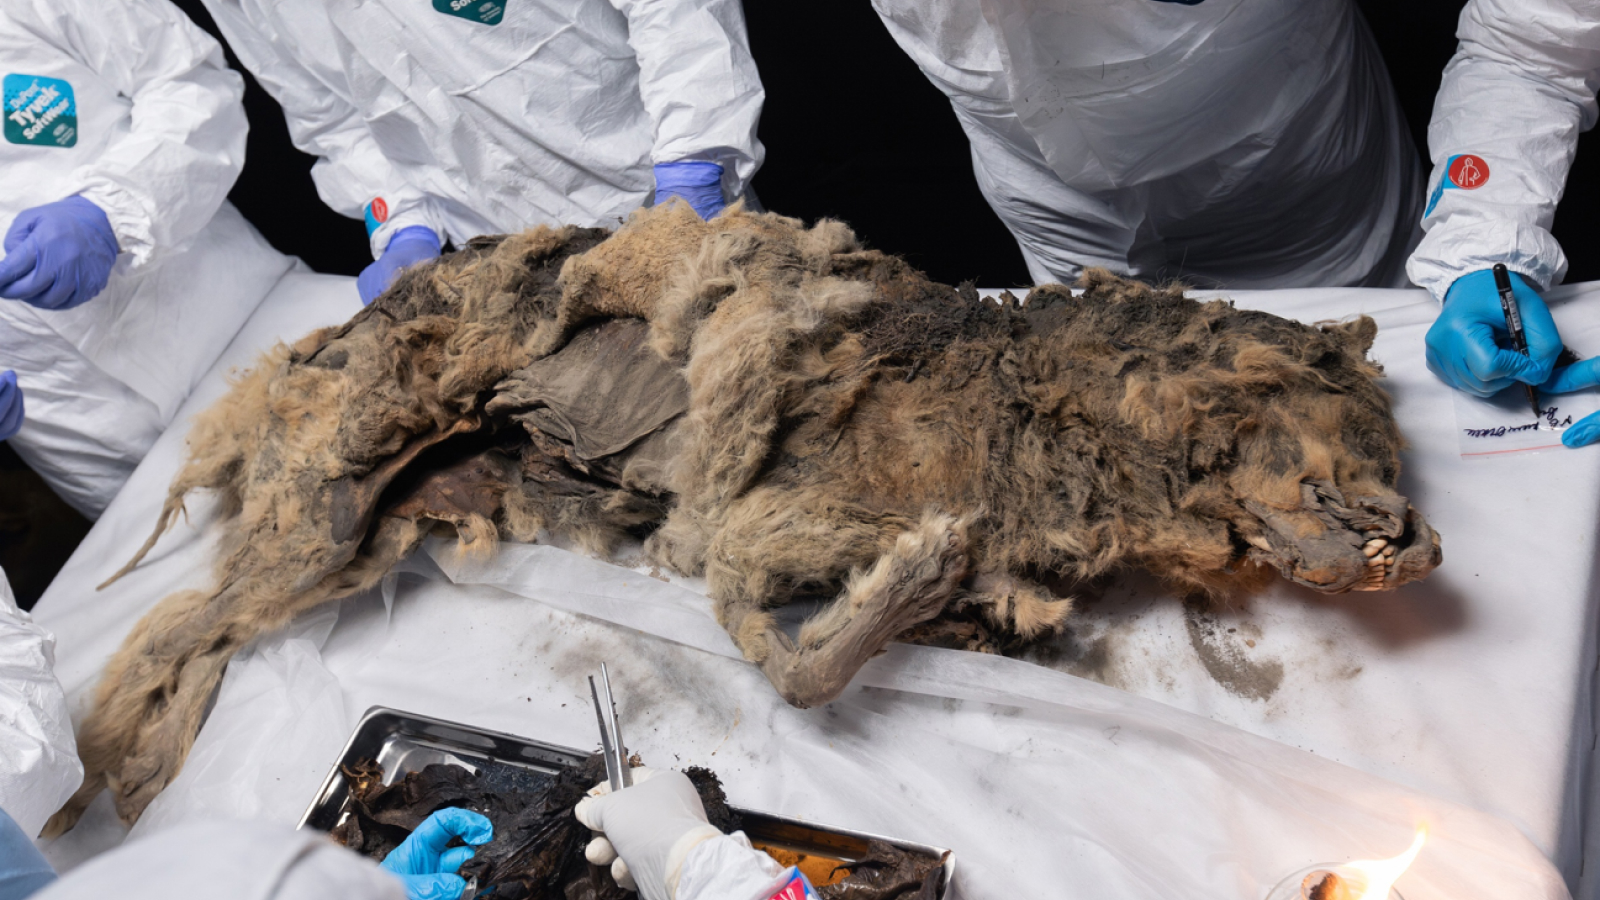  Stunning photos show 44,000-year-old mummified wolf discovered in Siberian permafrost 